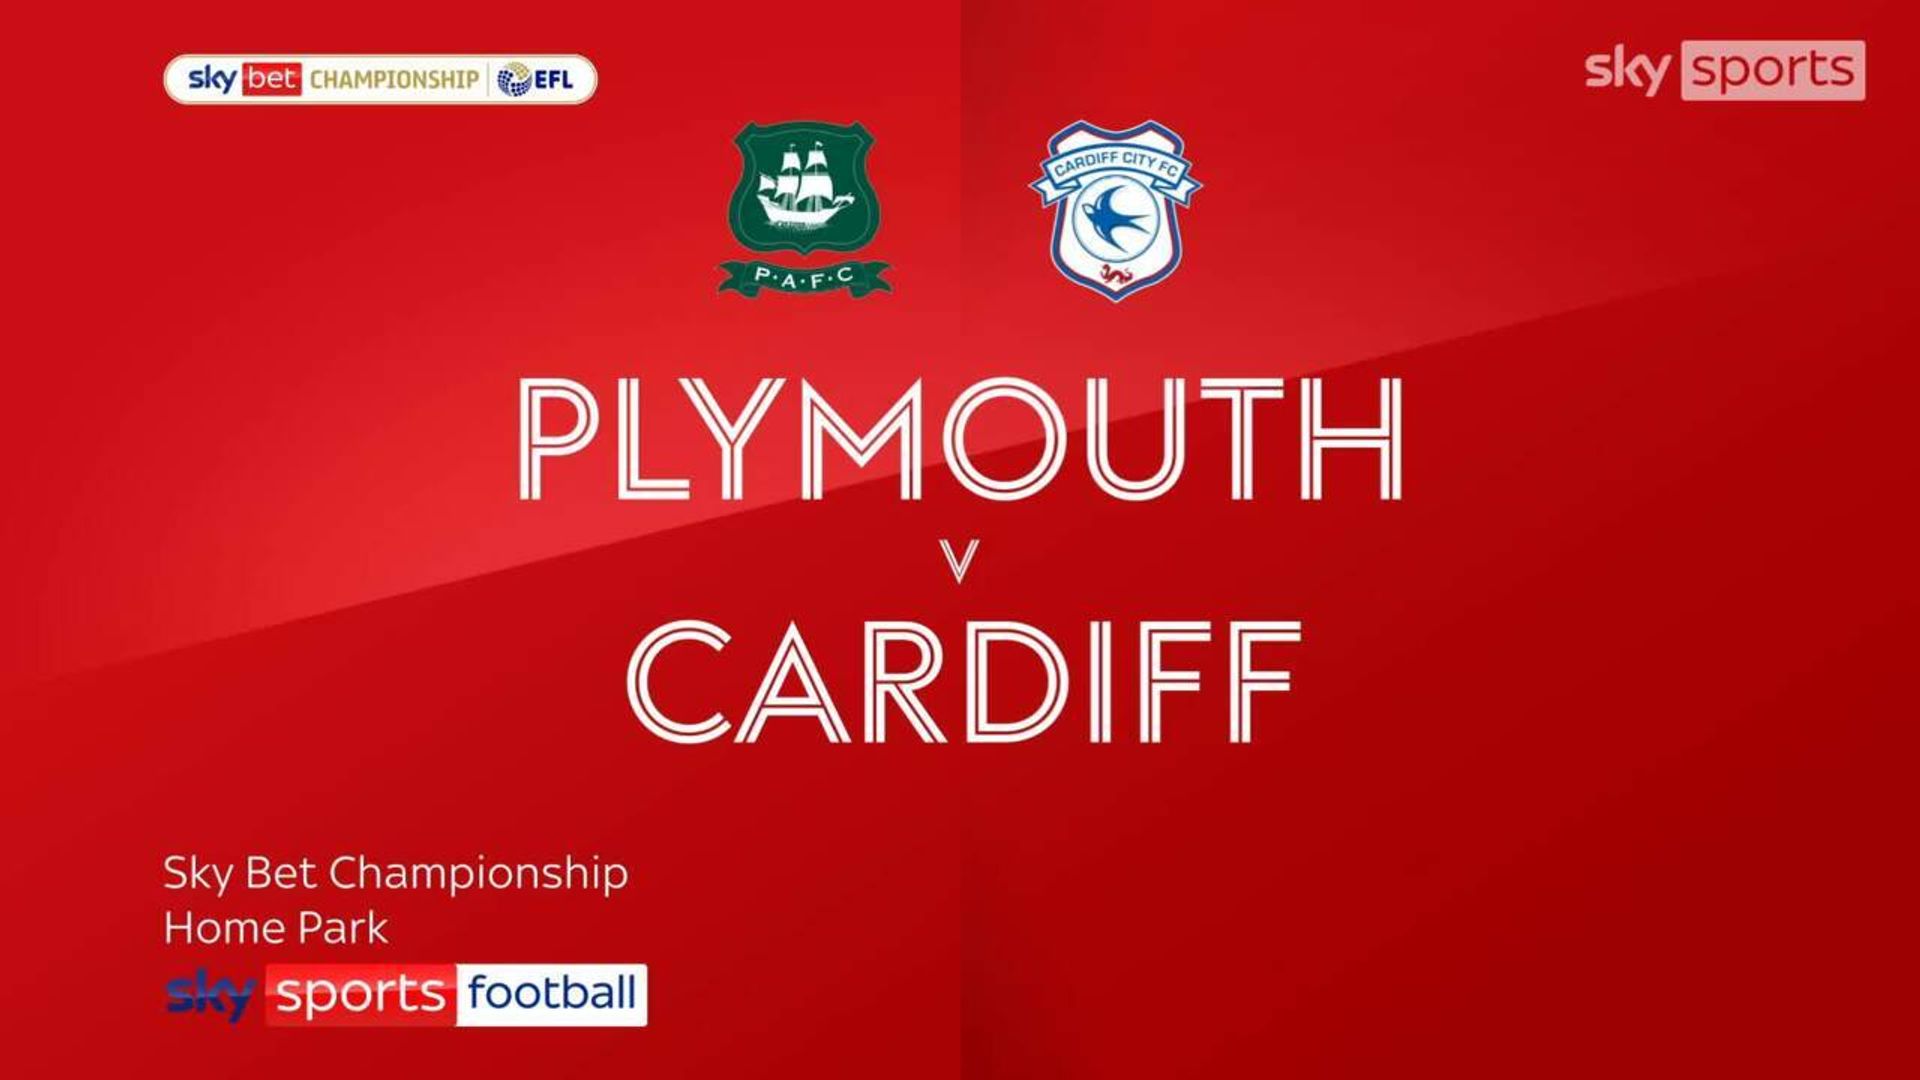 Plymouth 3-1 Cardiff